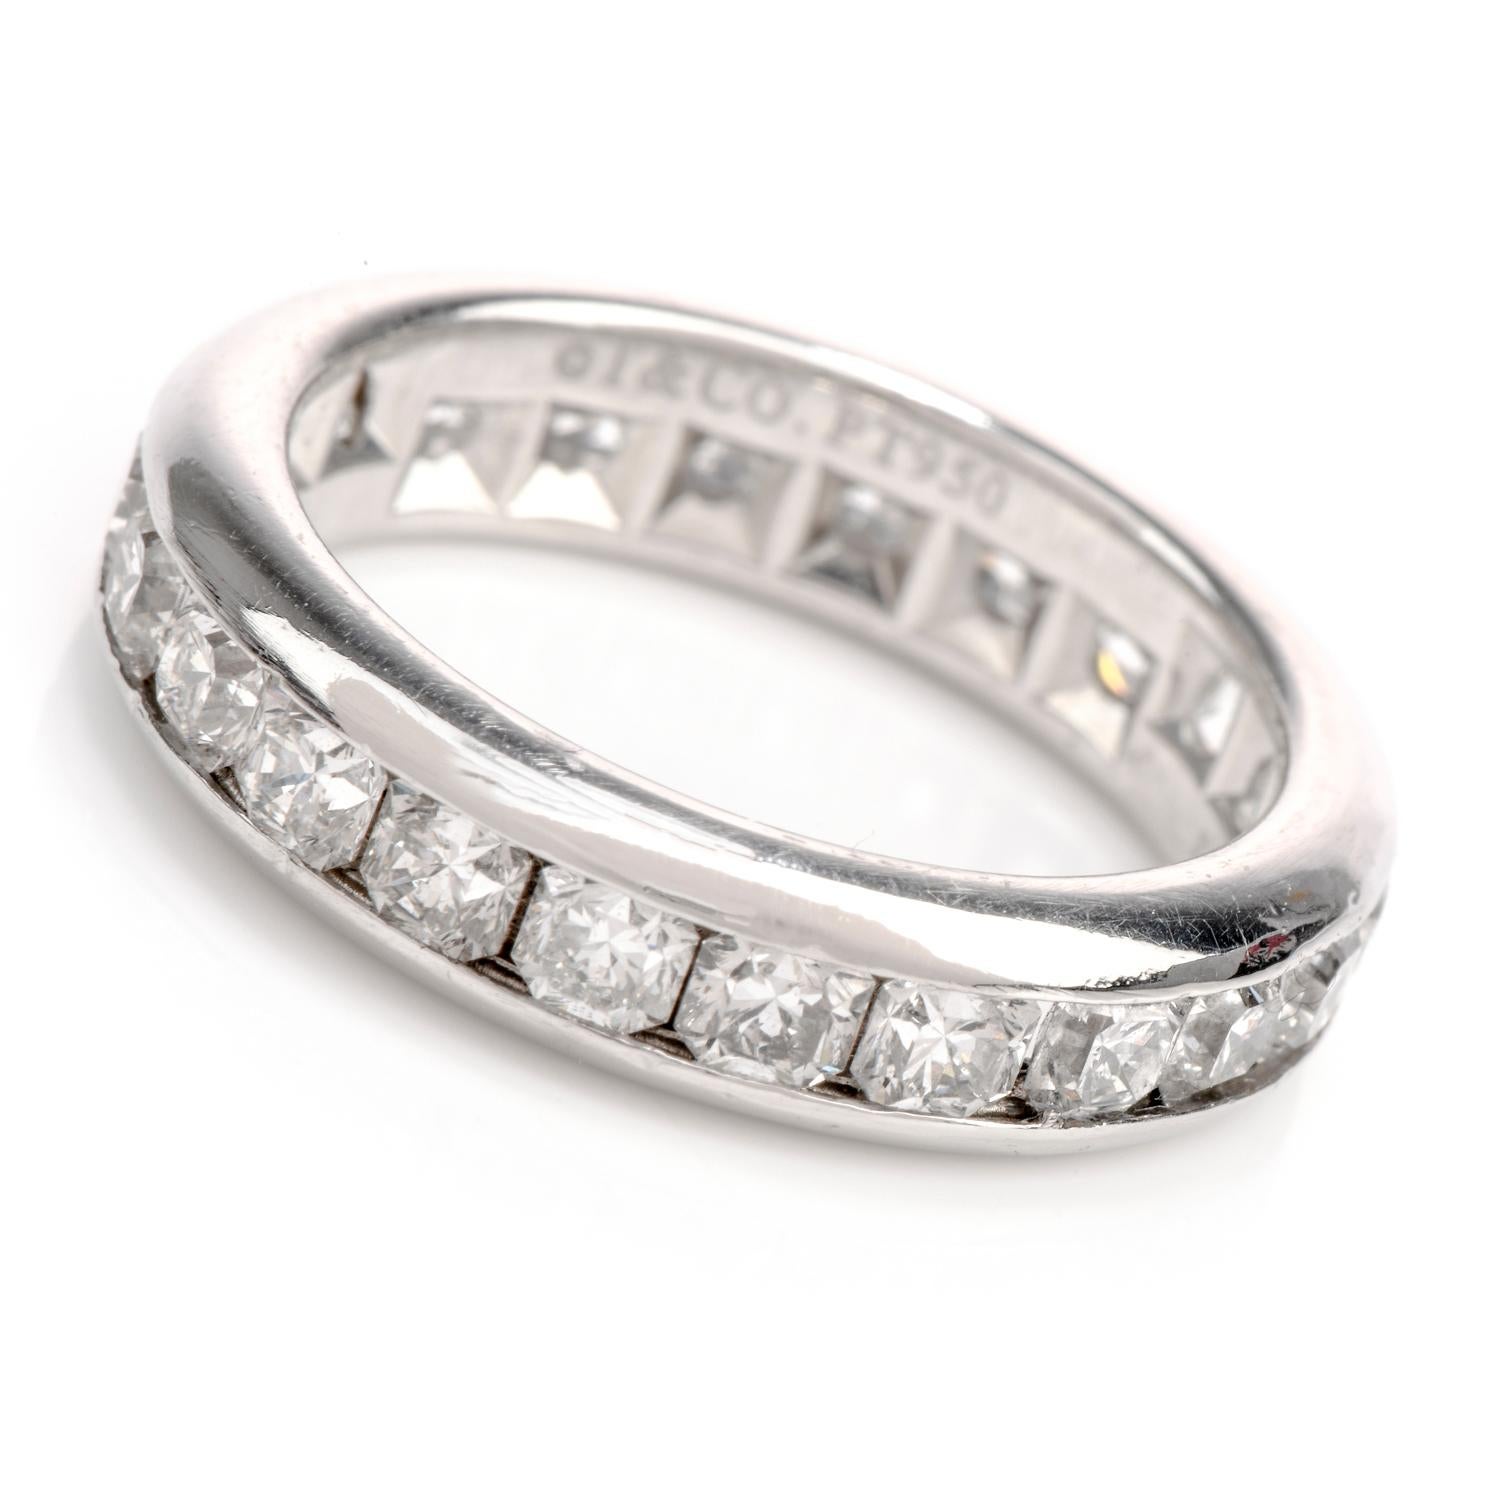 An Endless Ring of Love

This classic style Tiffany and Co. 'Lucida